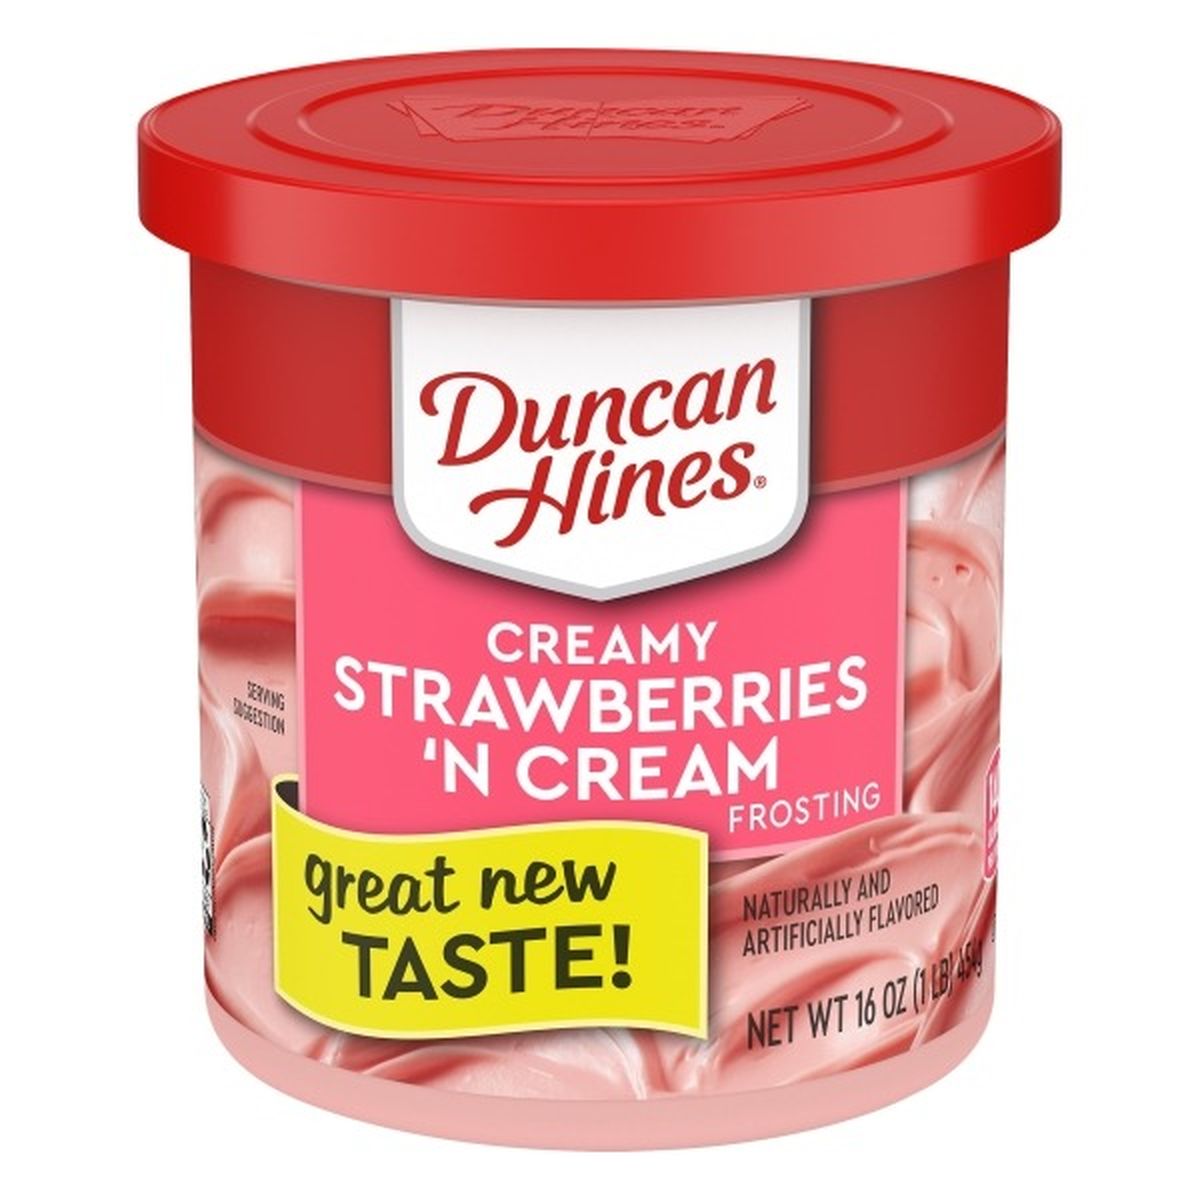 Calories in Duncan Hines Frosting, Strawberry N Cream, Creamy